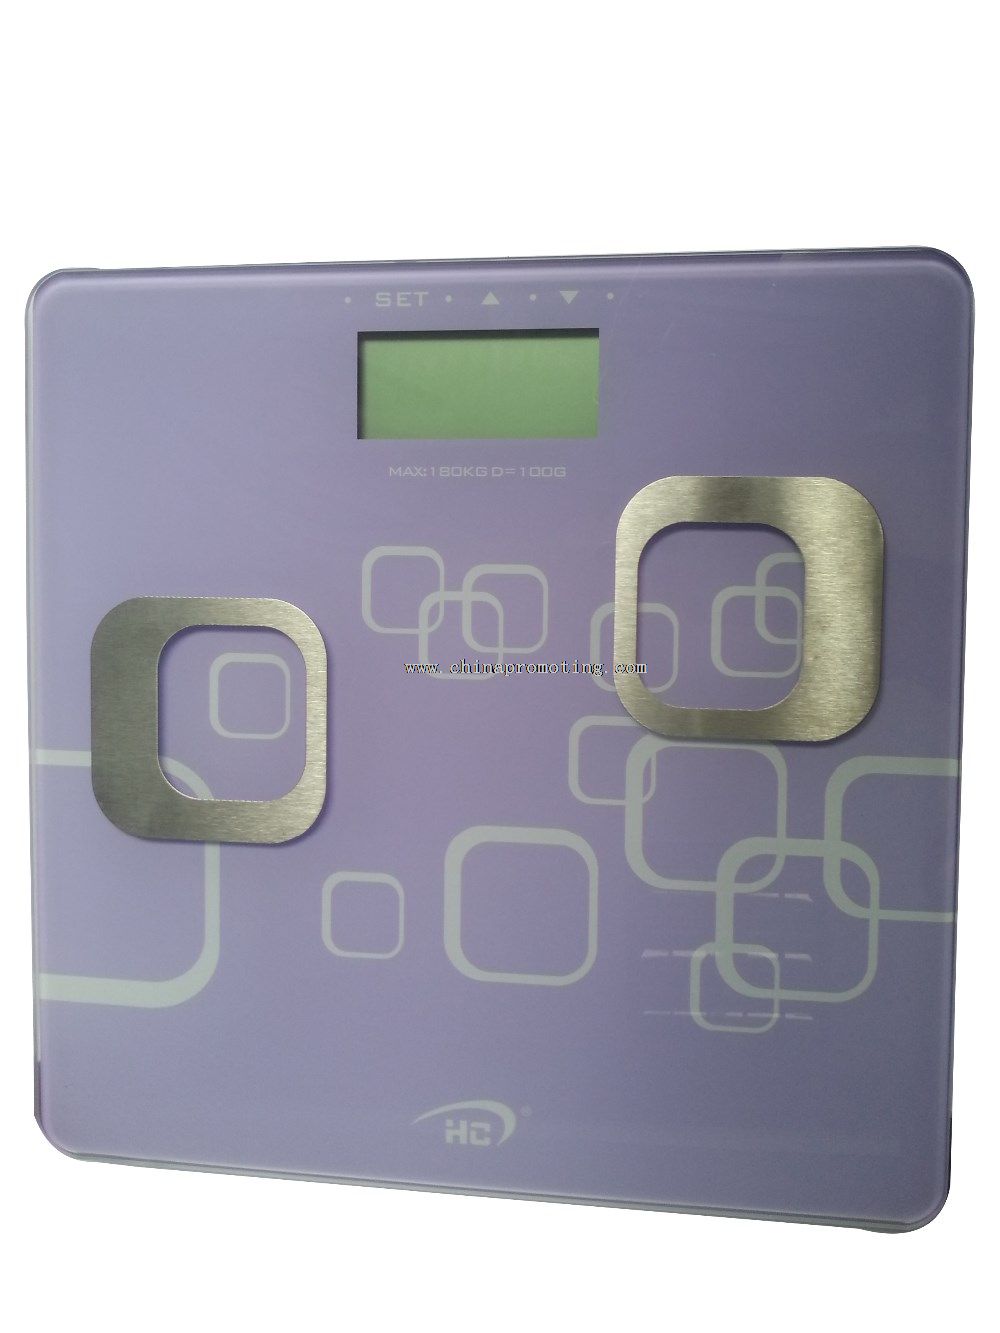 multi-functional health scale with 3V button cell and electronic body fat scale